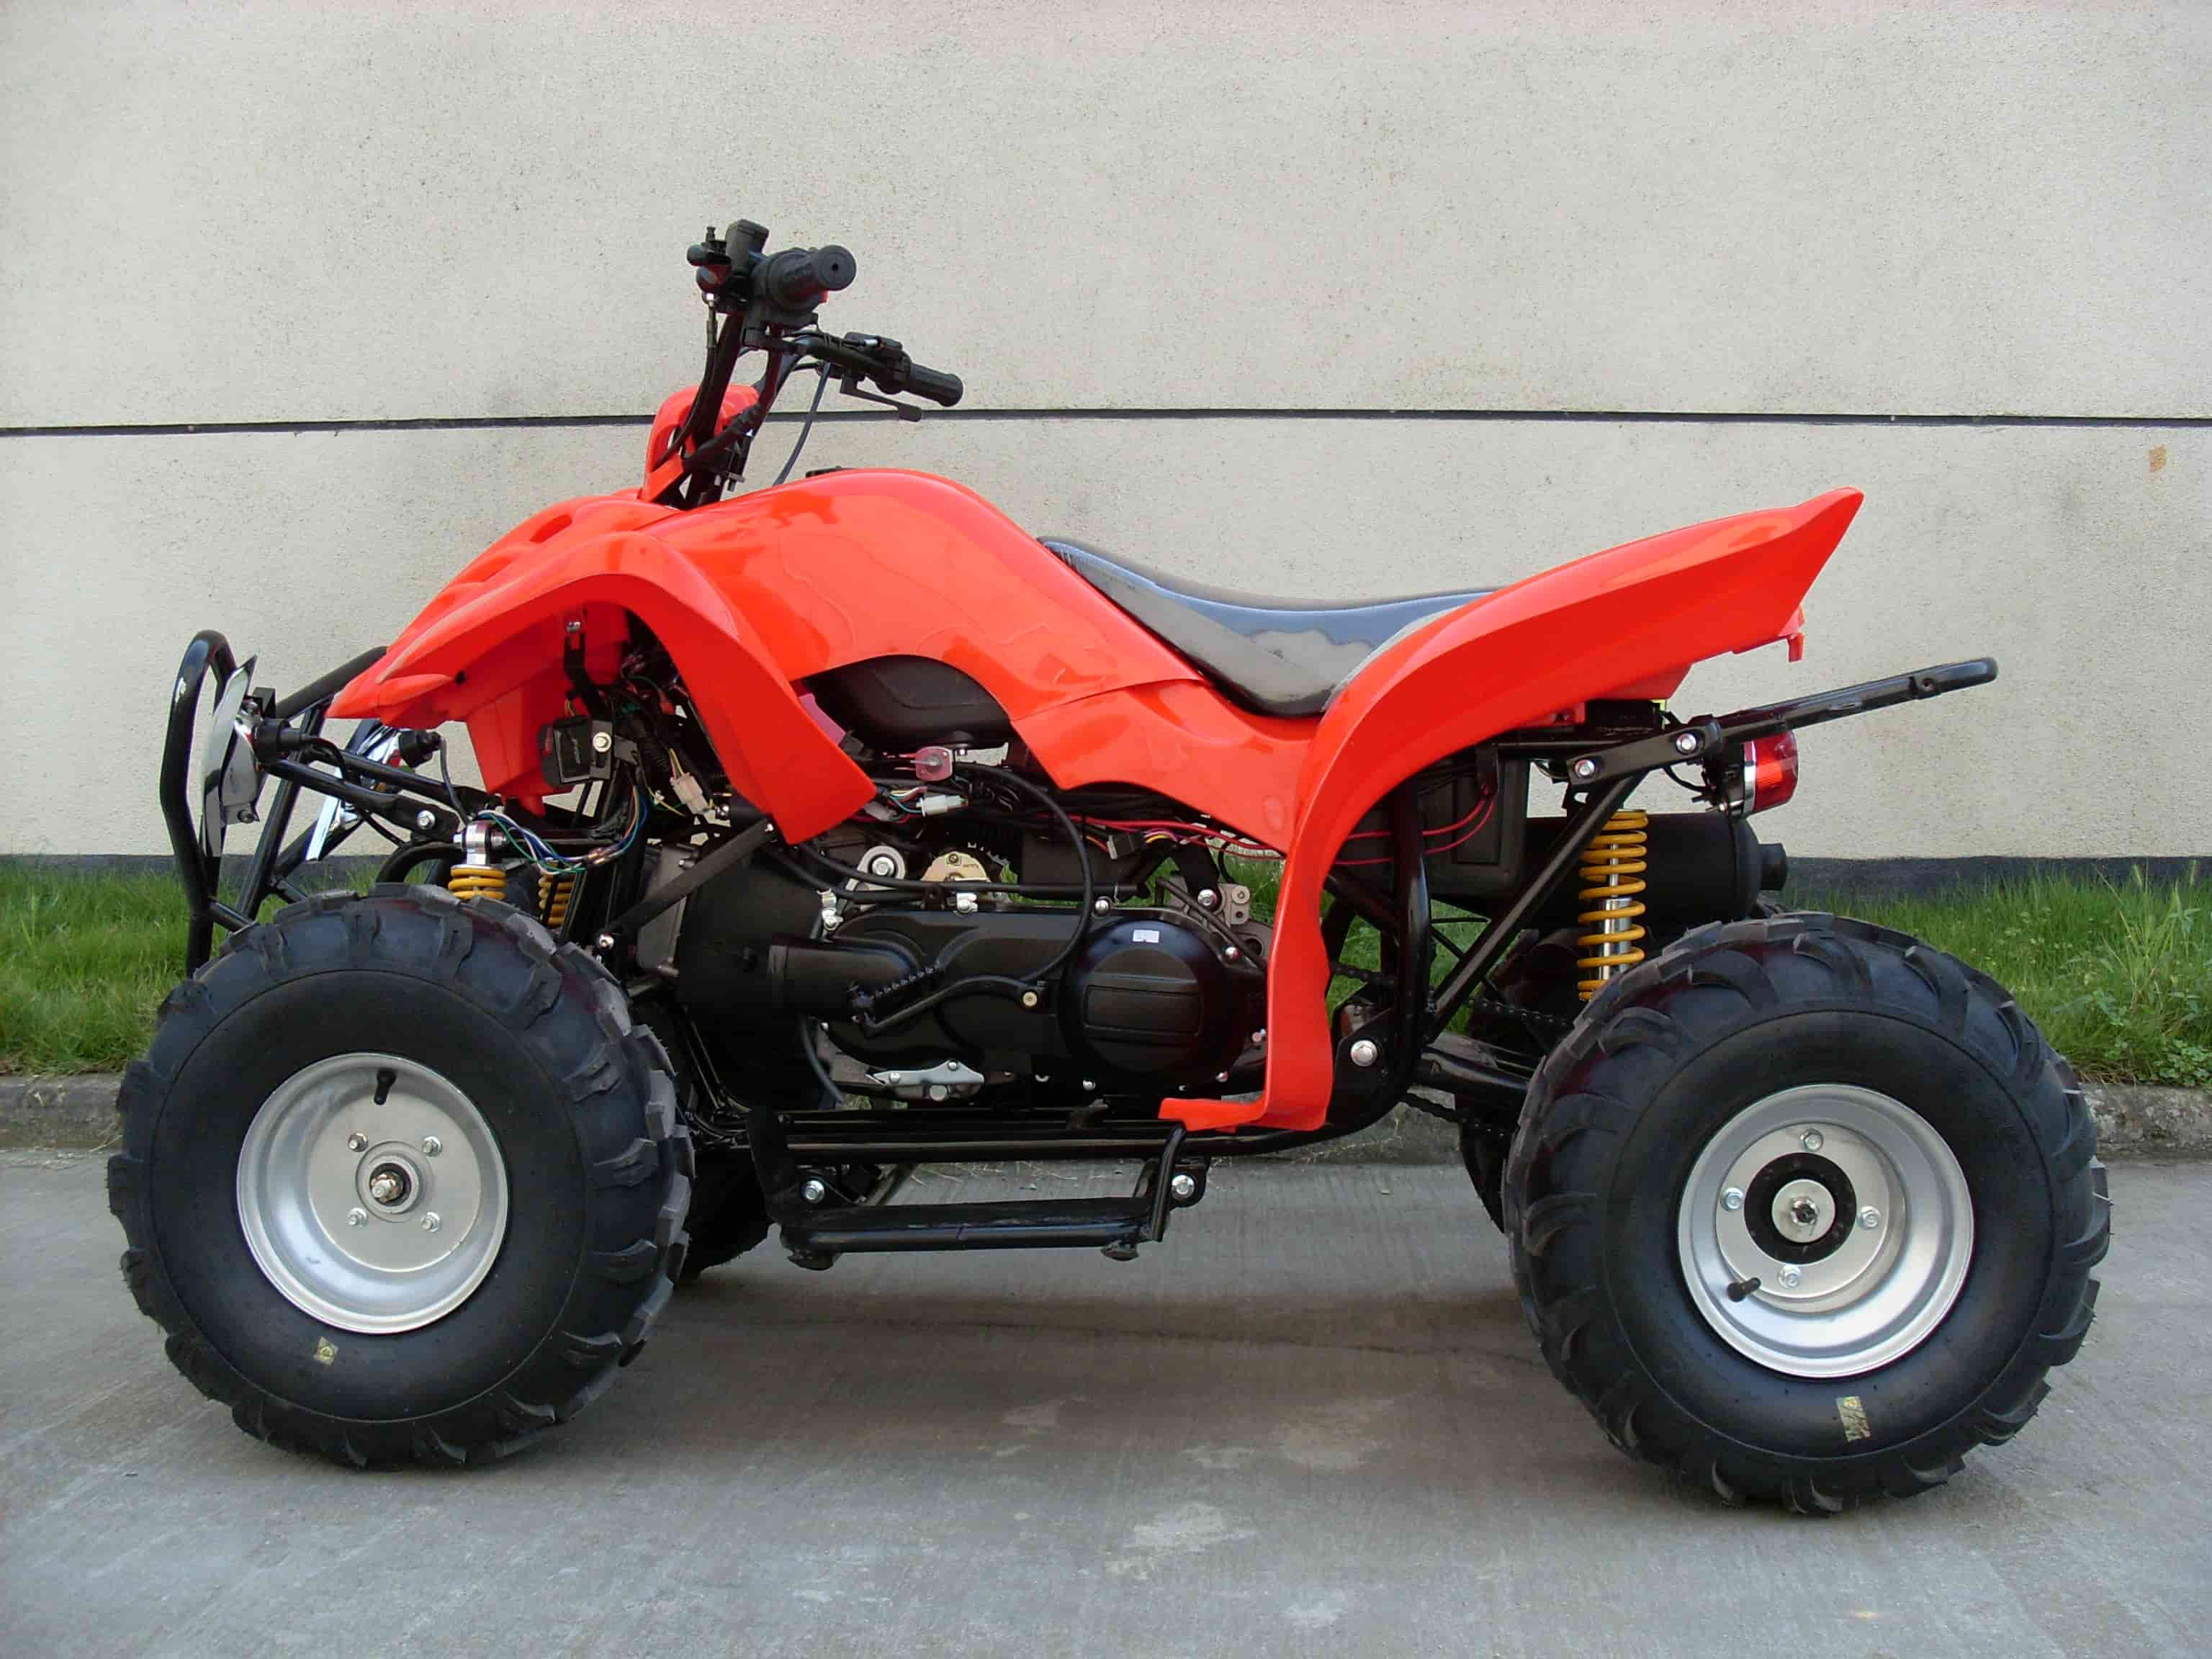 264 Units 150cc Gy6 Automtatic ATV Quads will be ship to Columbia